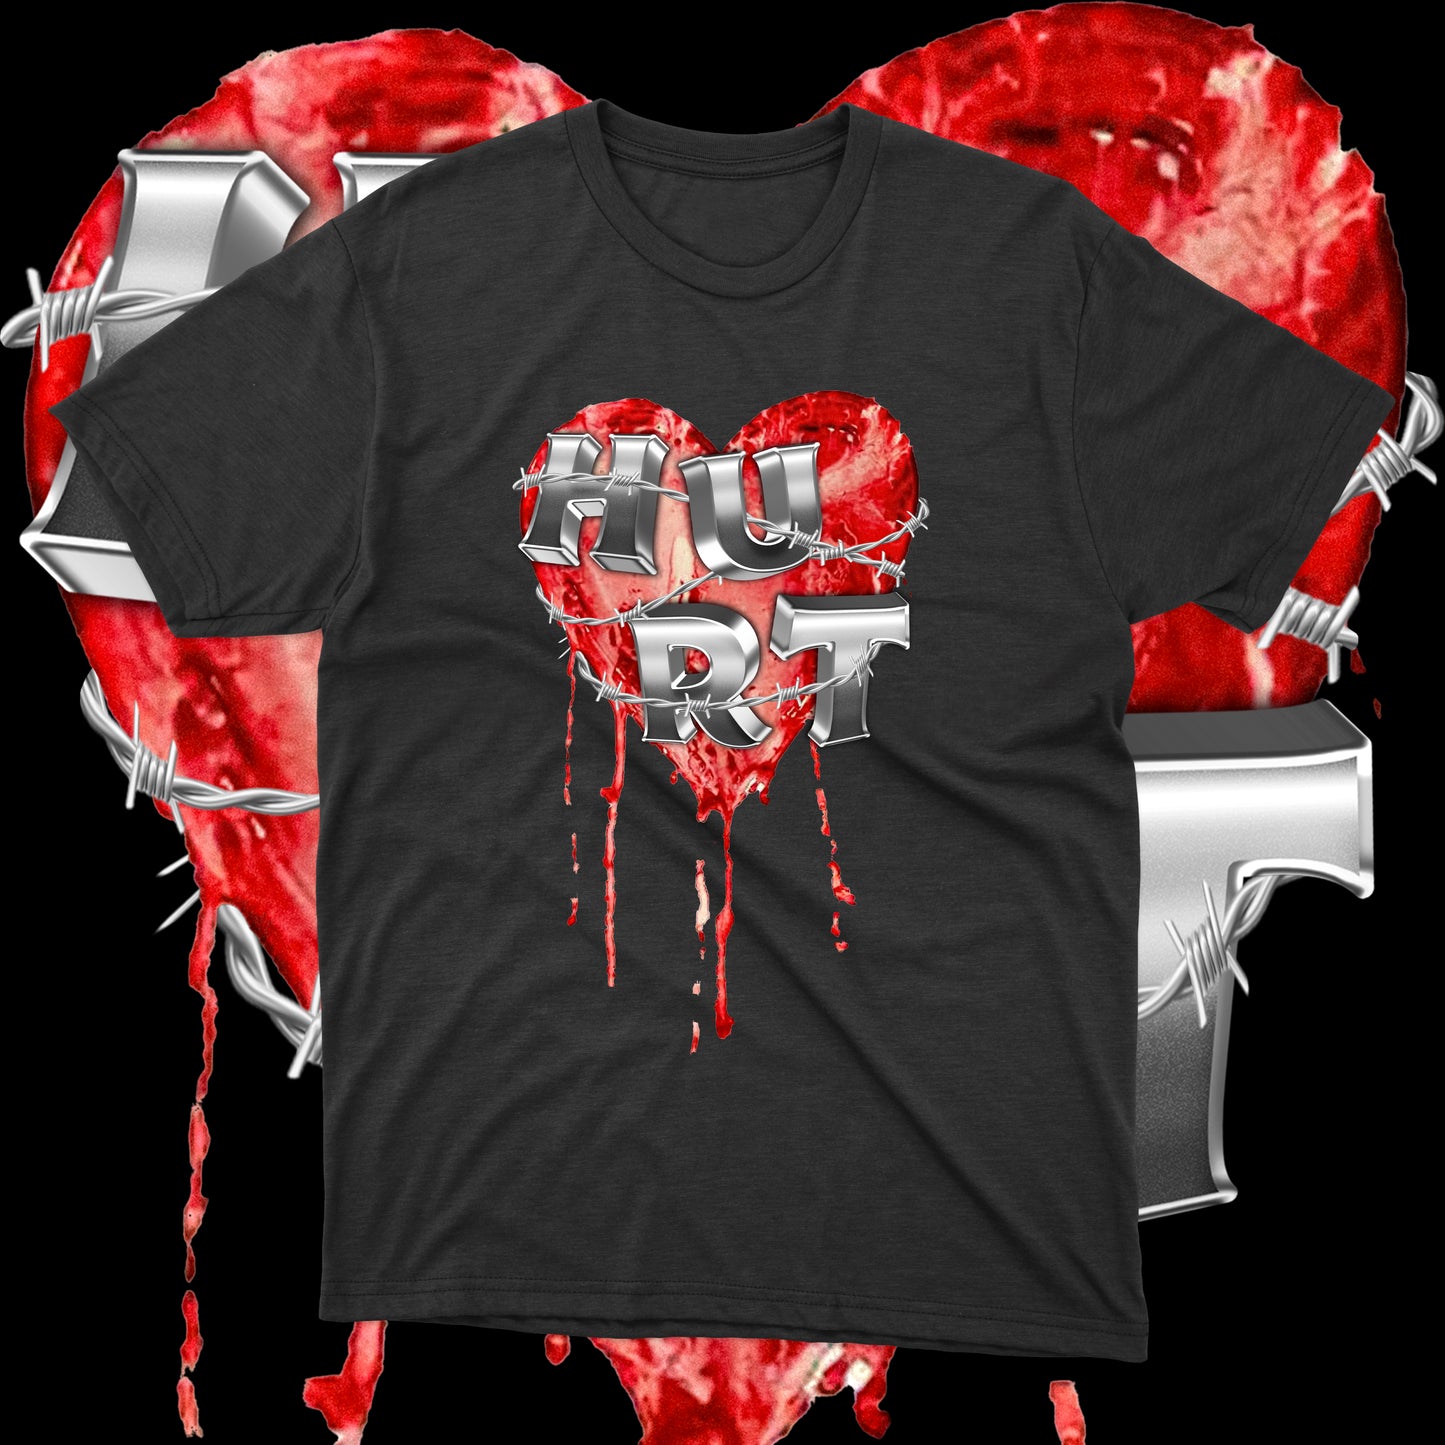 Wired Heart (T-Shirt)